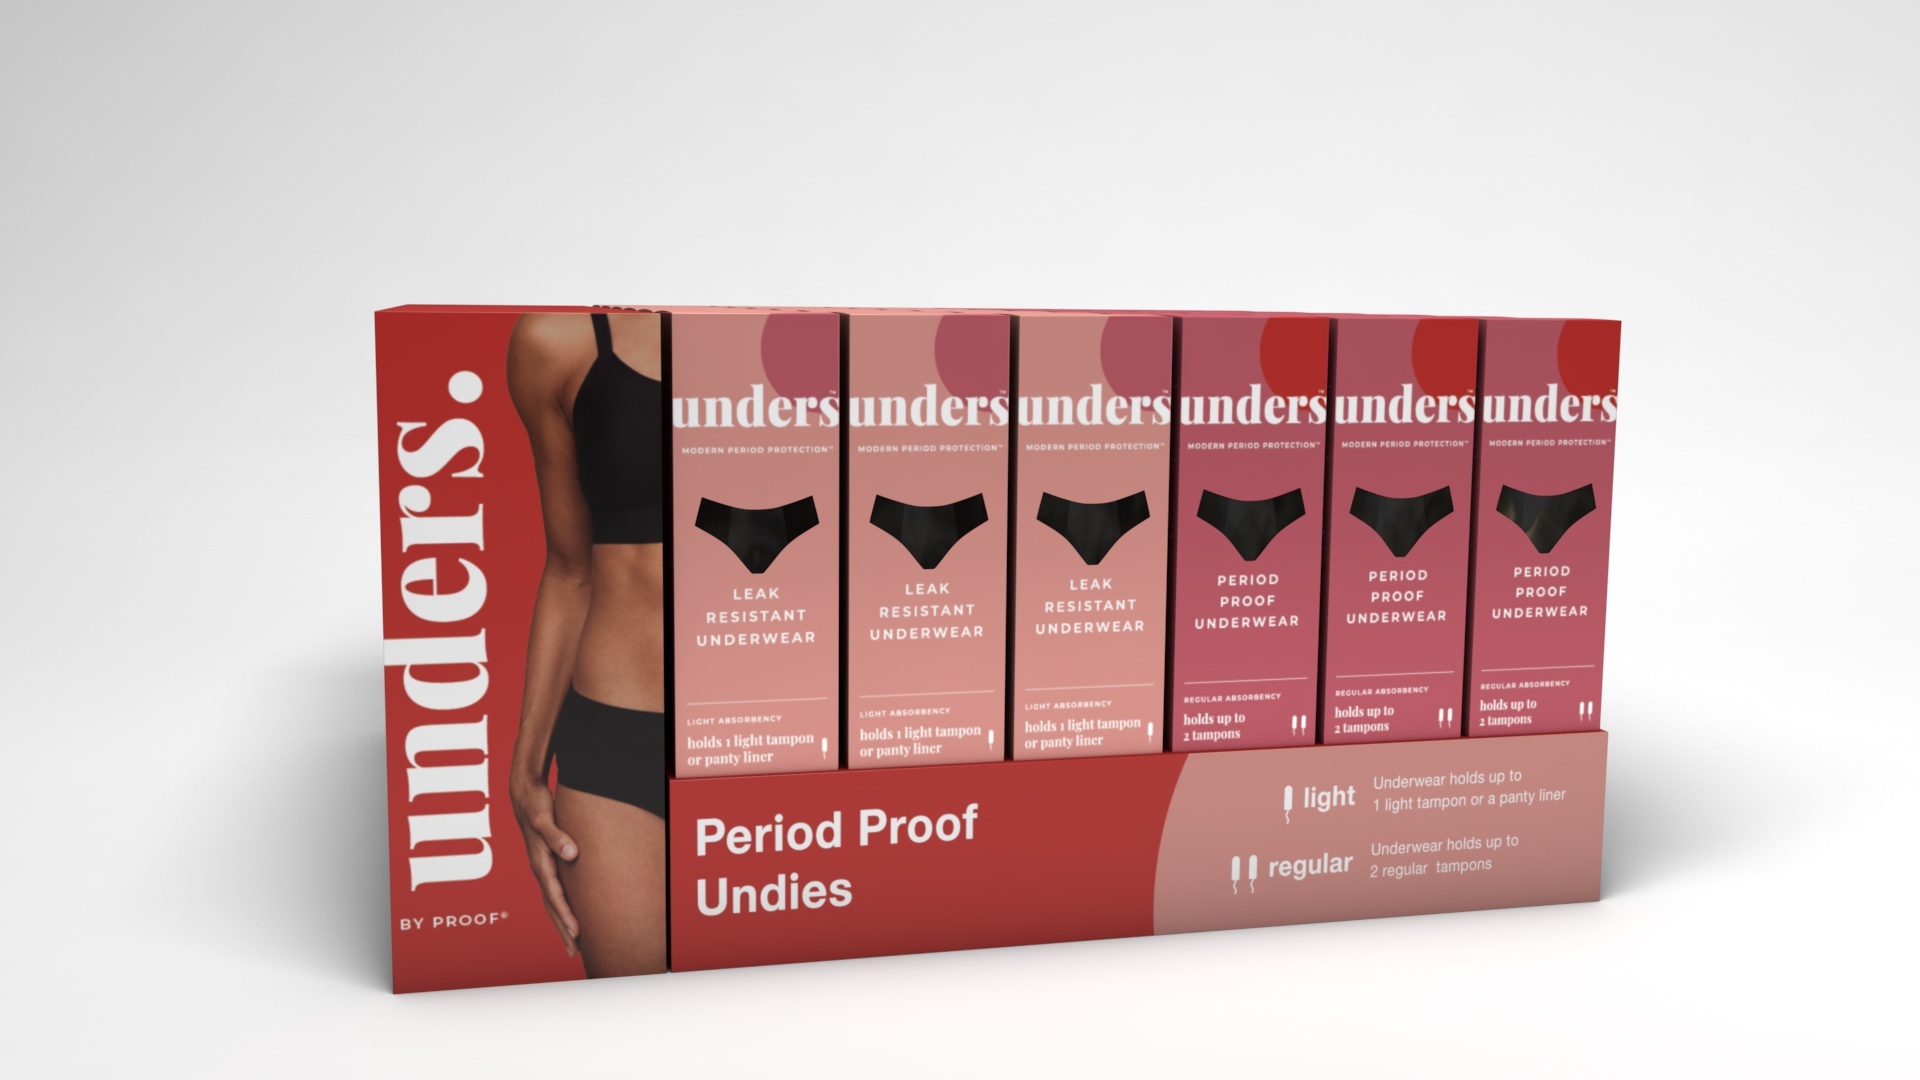 Picked up my pair of Unders by Proof leakproof undies today! Visit you